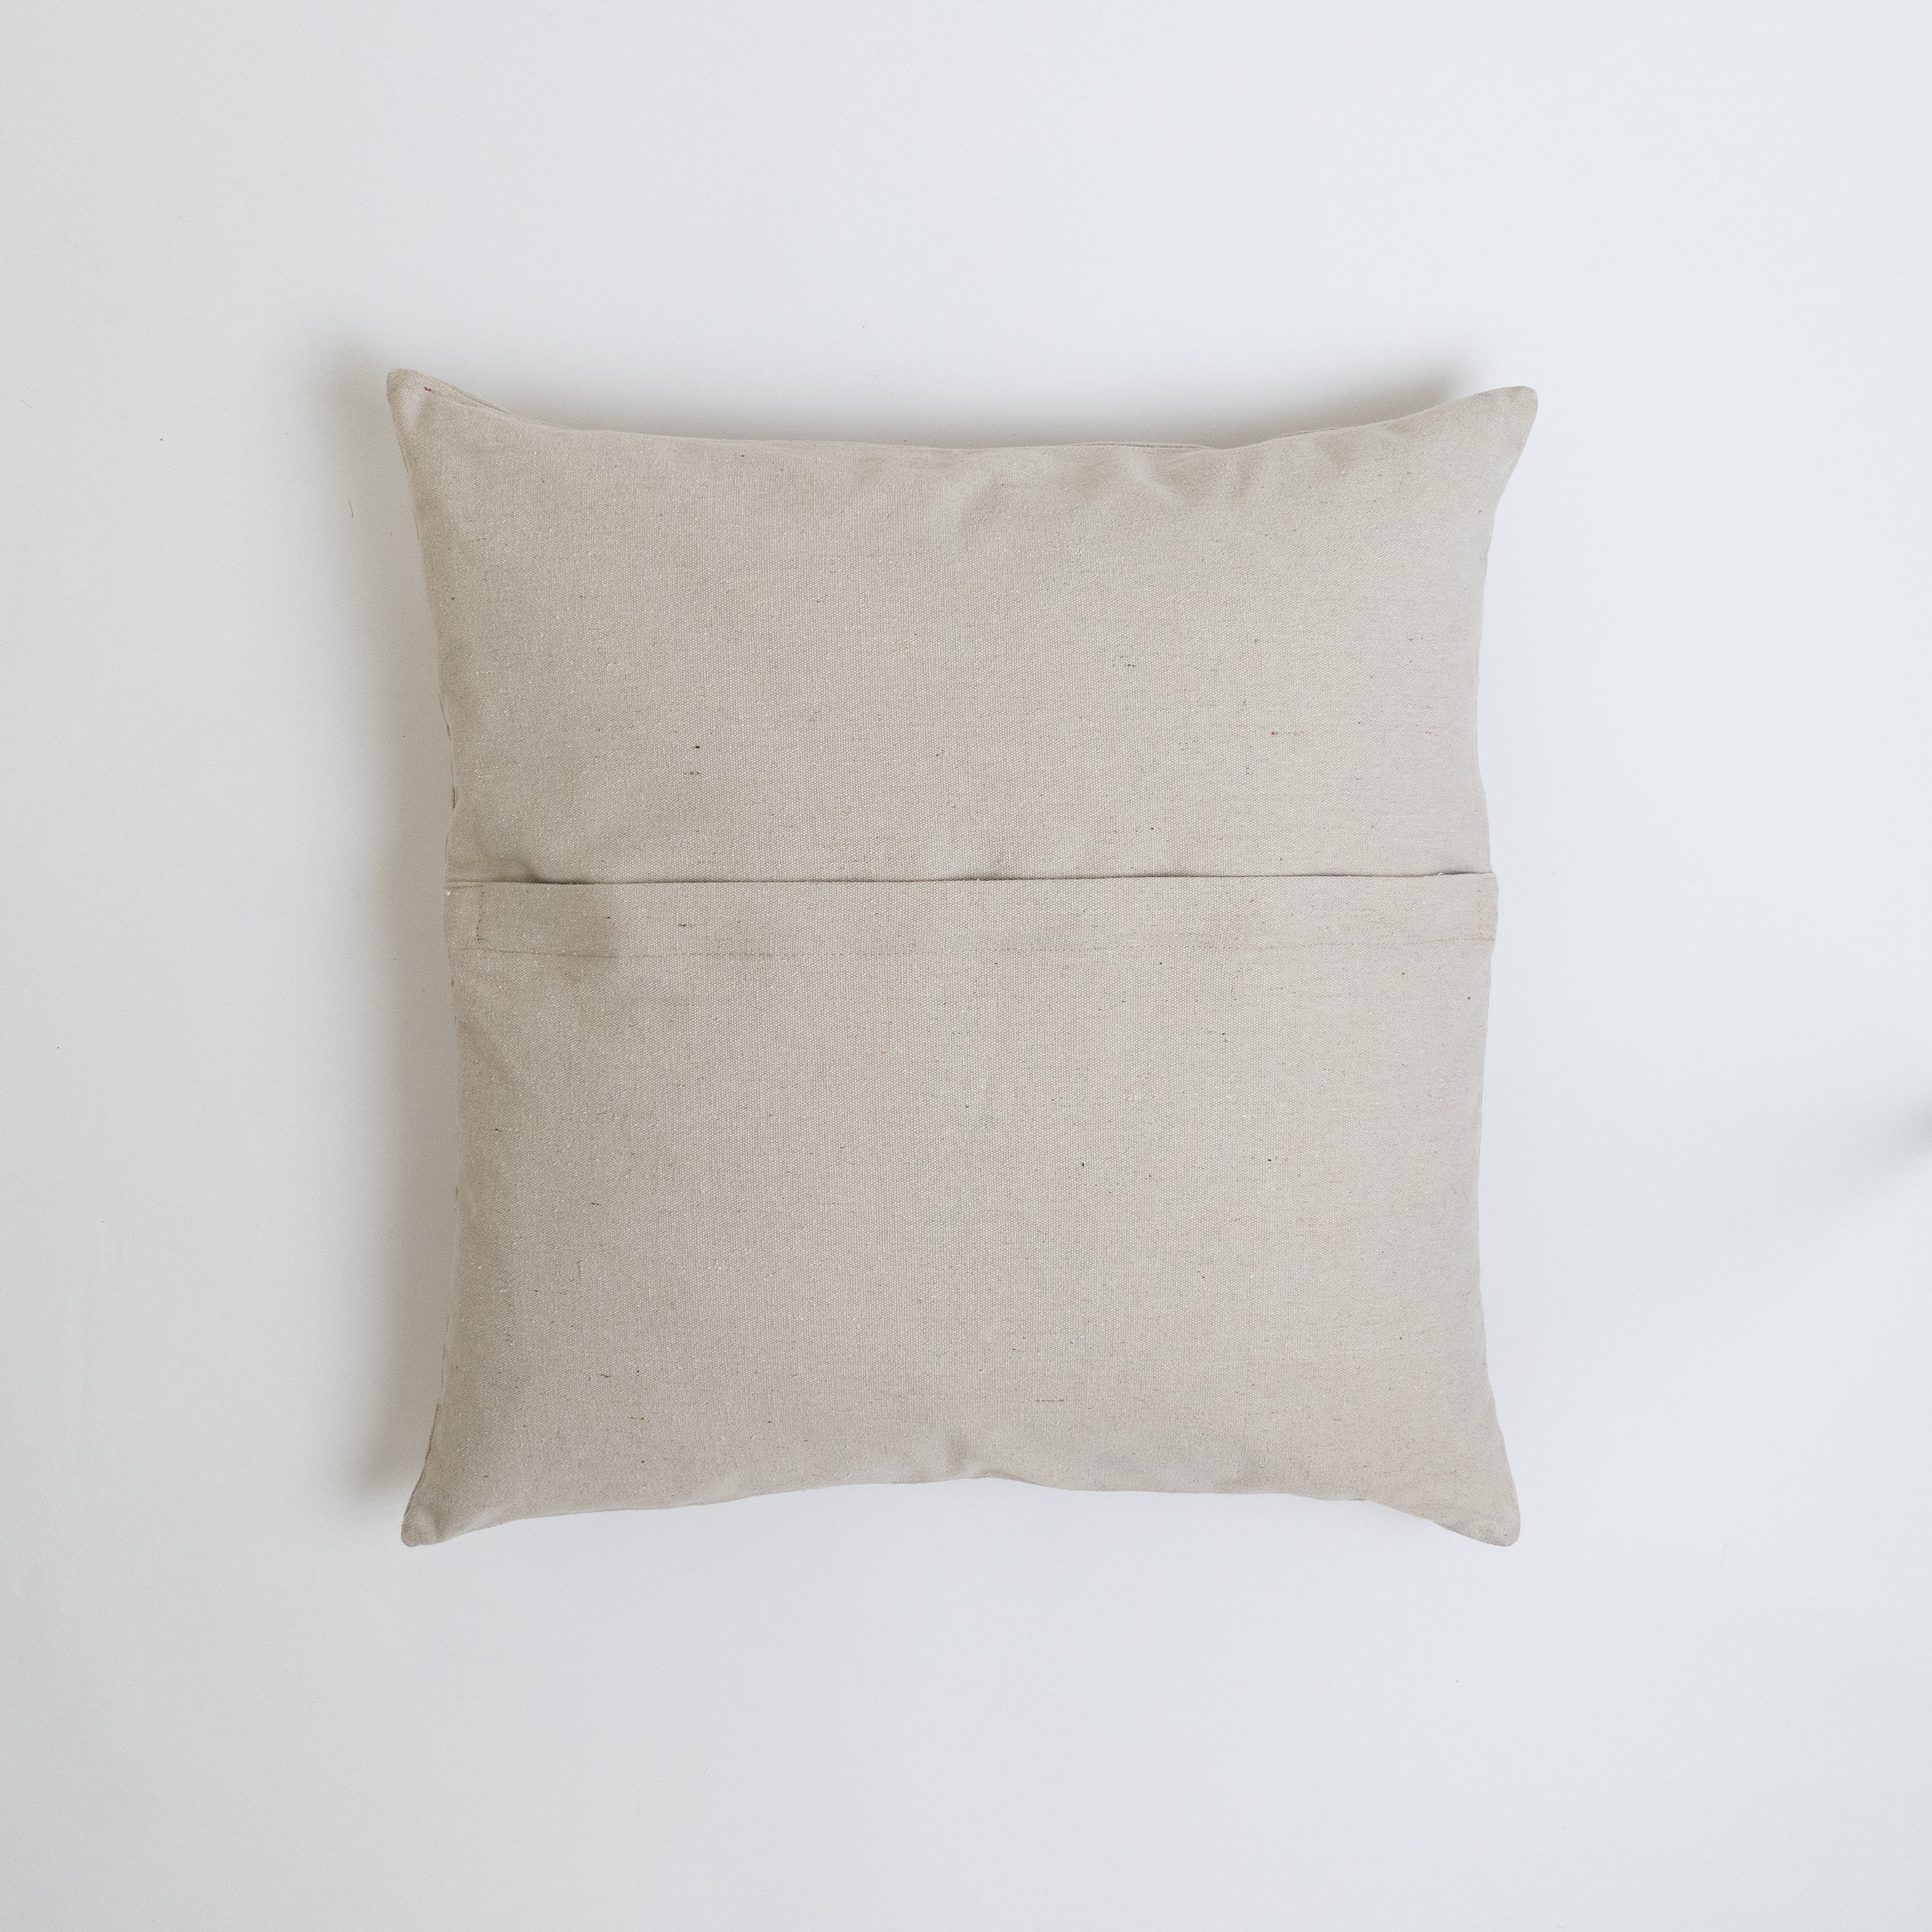 Cushion Cover Beige 60x60 cm - Wood and Steel Furnitures